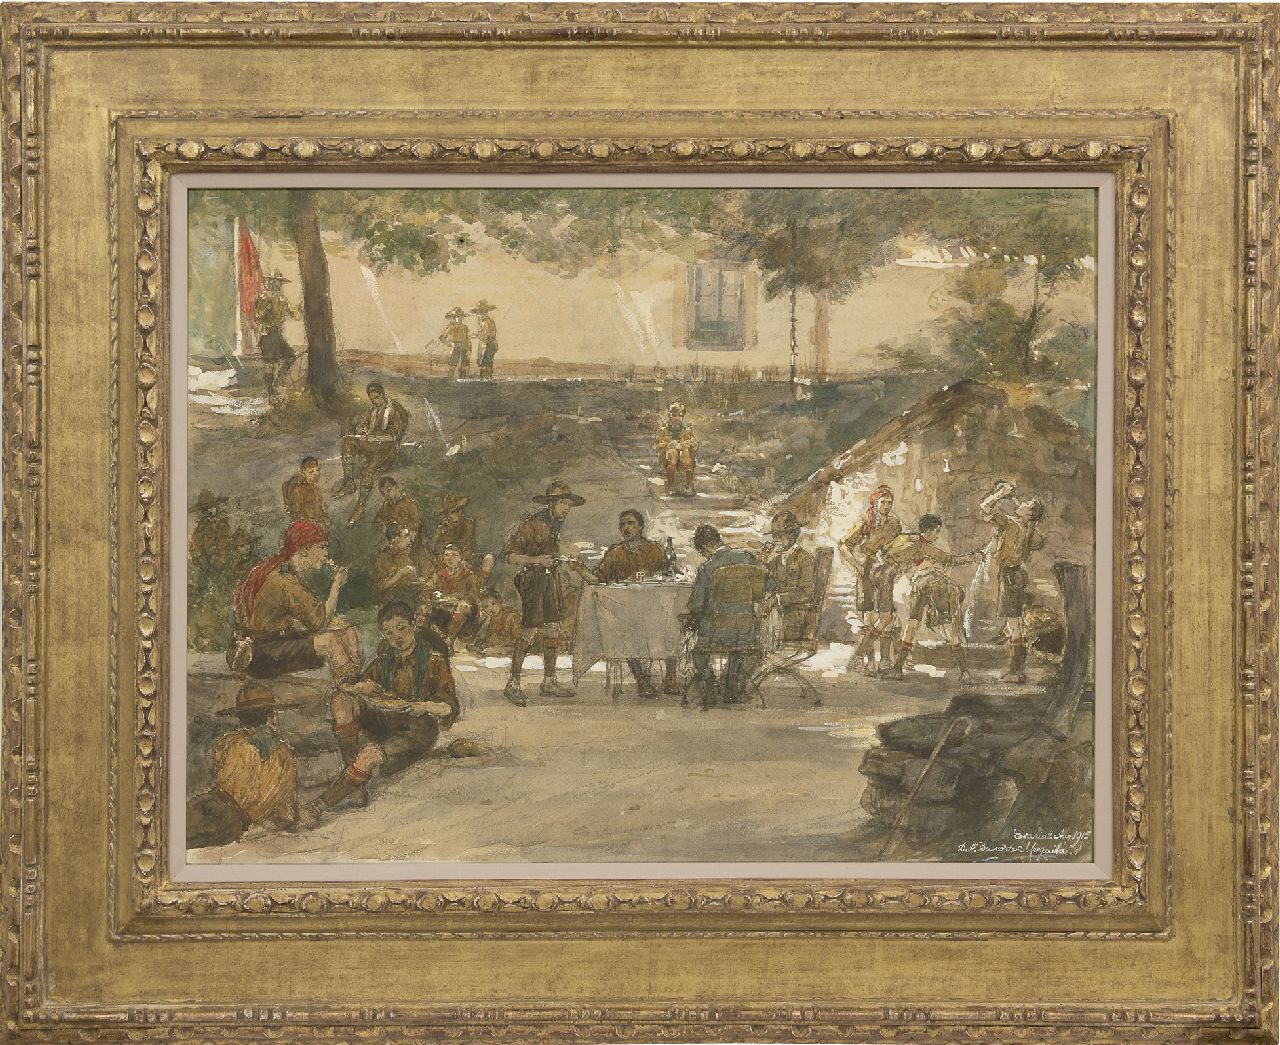 Bueno de Mesquita D.A.  | David Abraham Bueno de Mesquita | Watercolours and drawings offered for sale | Boy scouts at the Escorial, Spain, black chalk and watercolour on paper 47.5 x 63.0 cm, signed l.r. and dated 'Escorial' Aug 1915